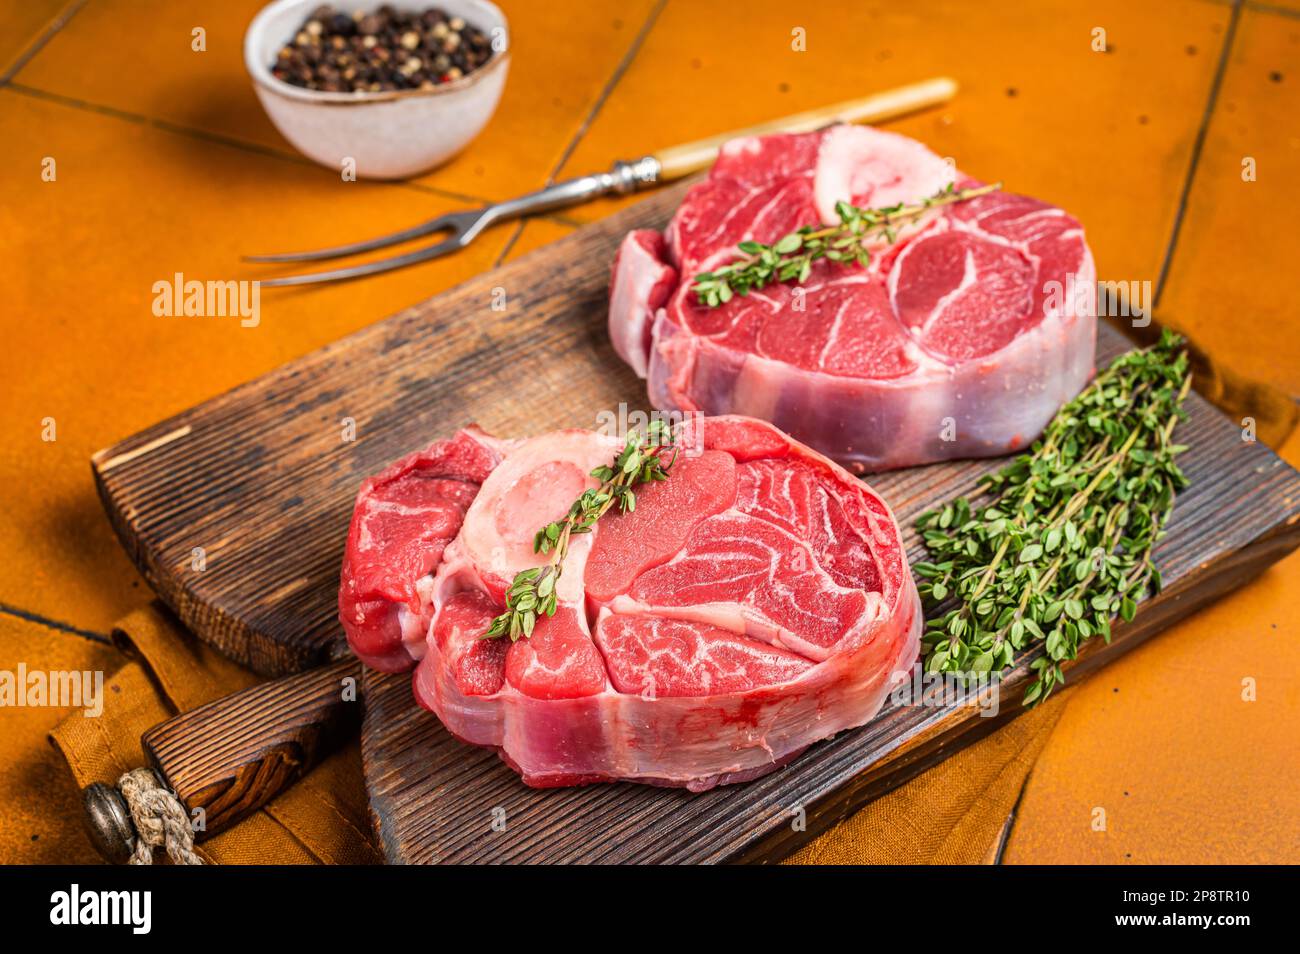 Osso buco Veal shank, raw cross cut veal shank, Italian Ossobuco. Orange background. Top view. Stock Photo